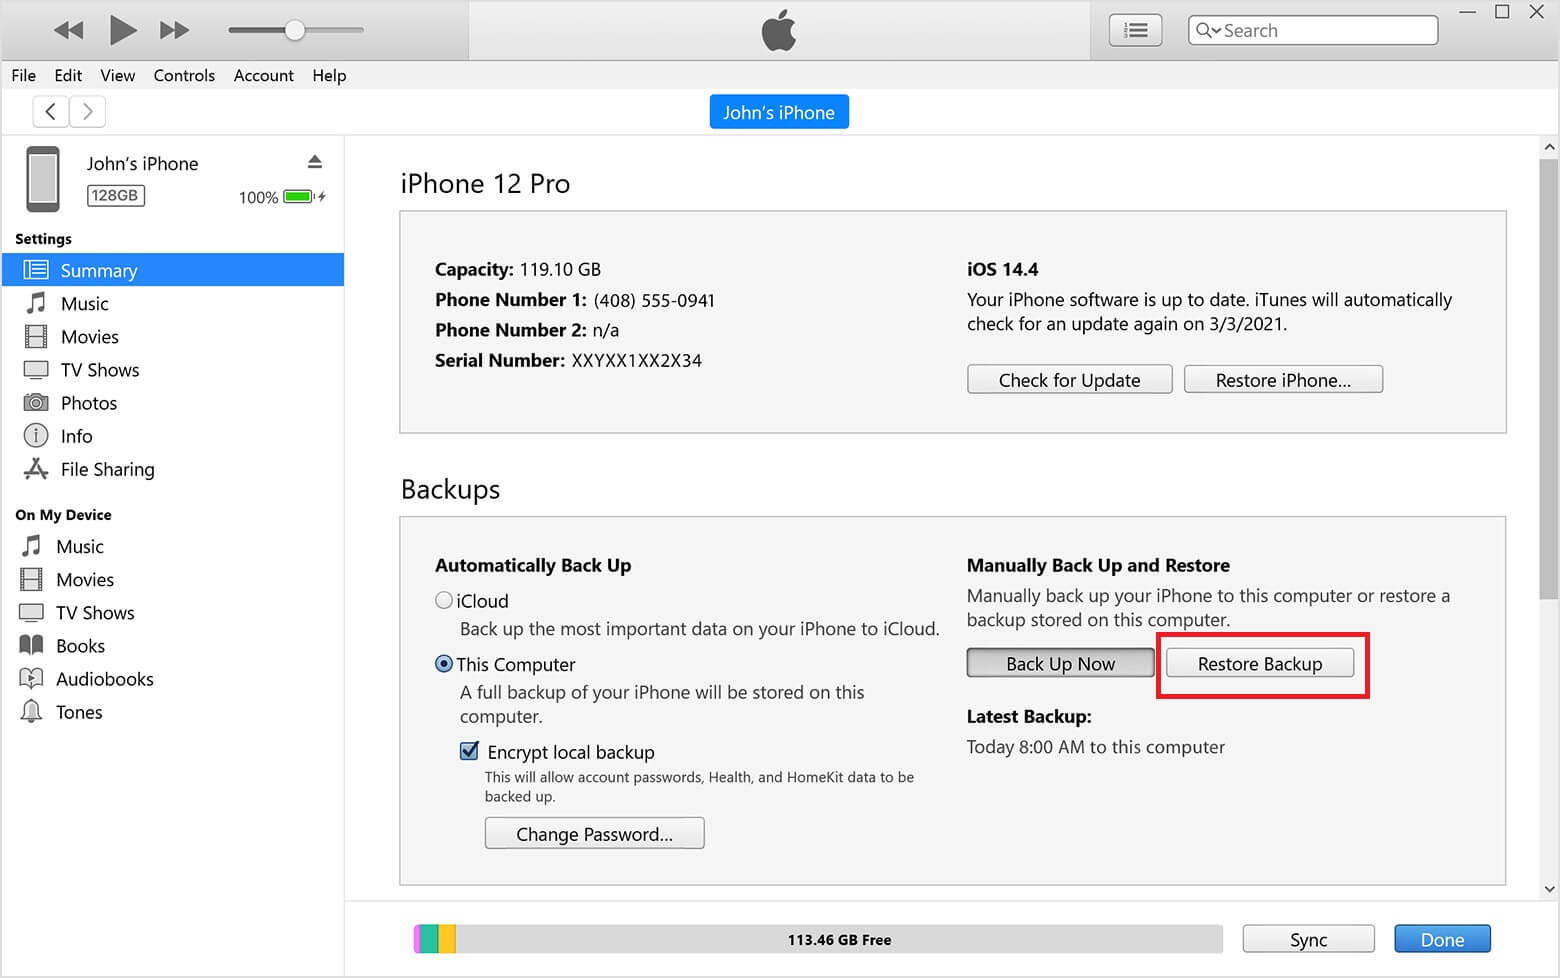 photo vault recovery with iTunes backup